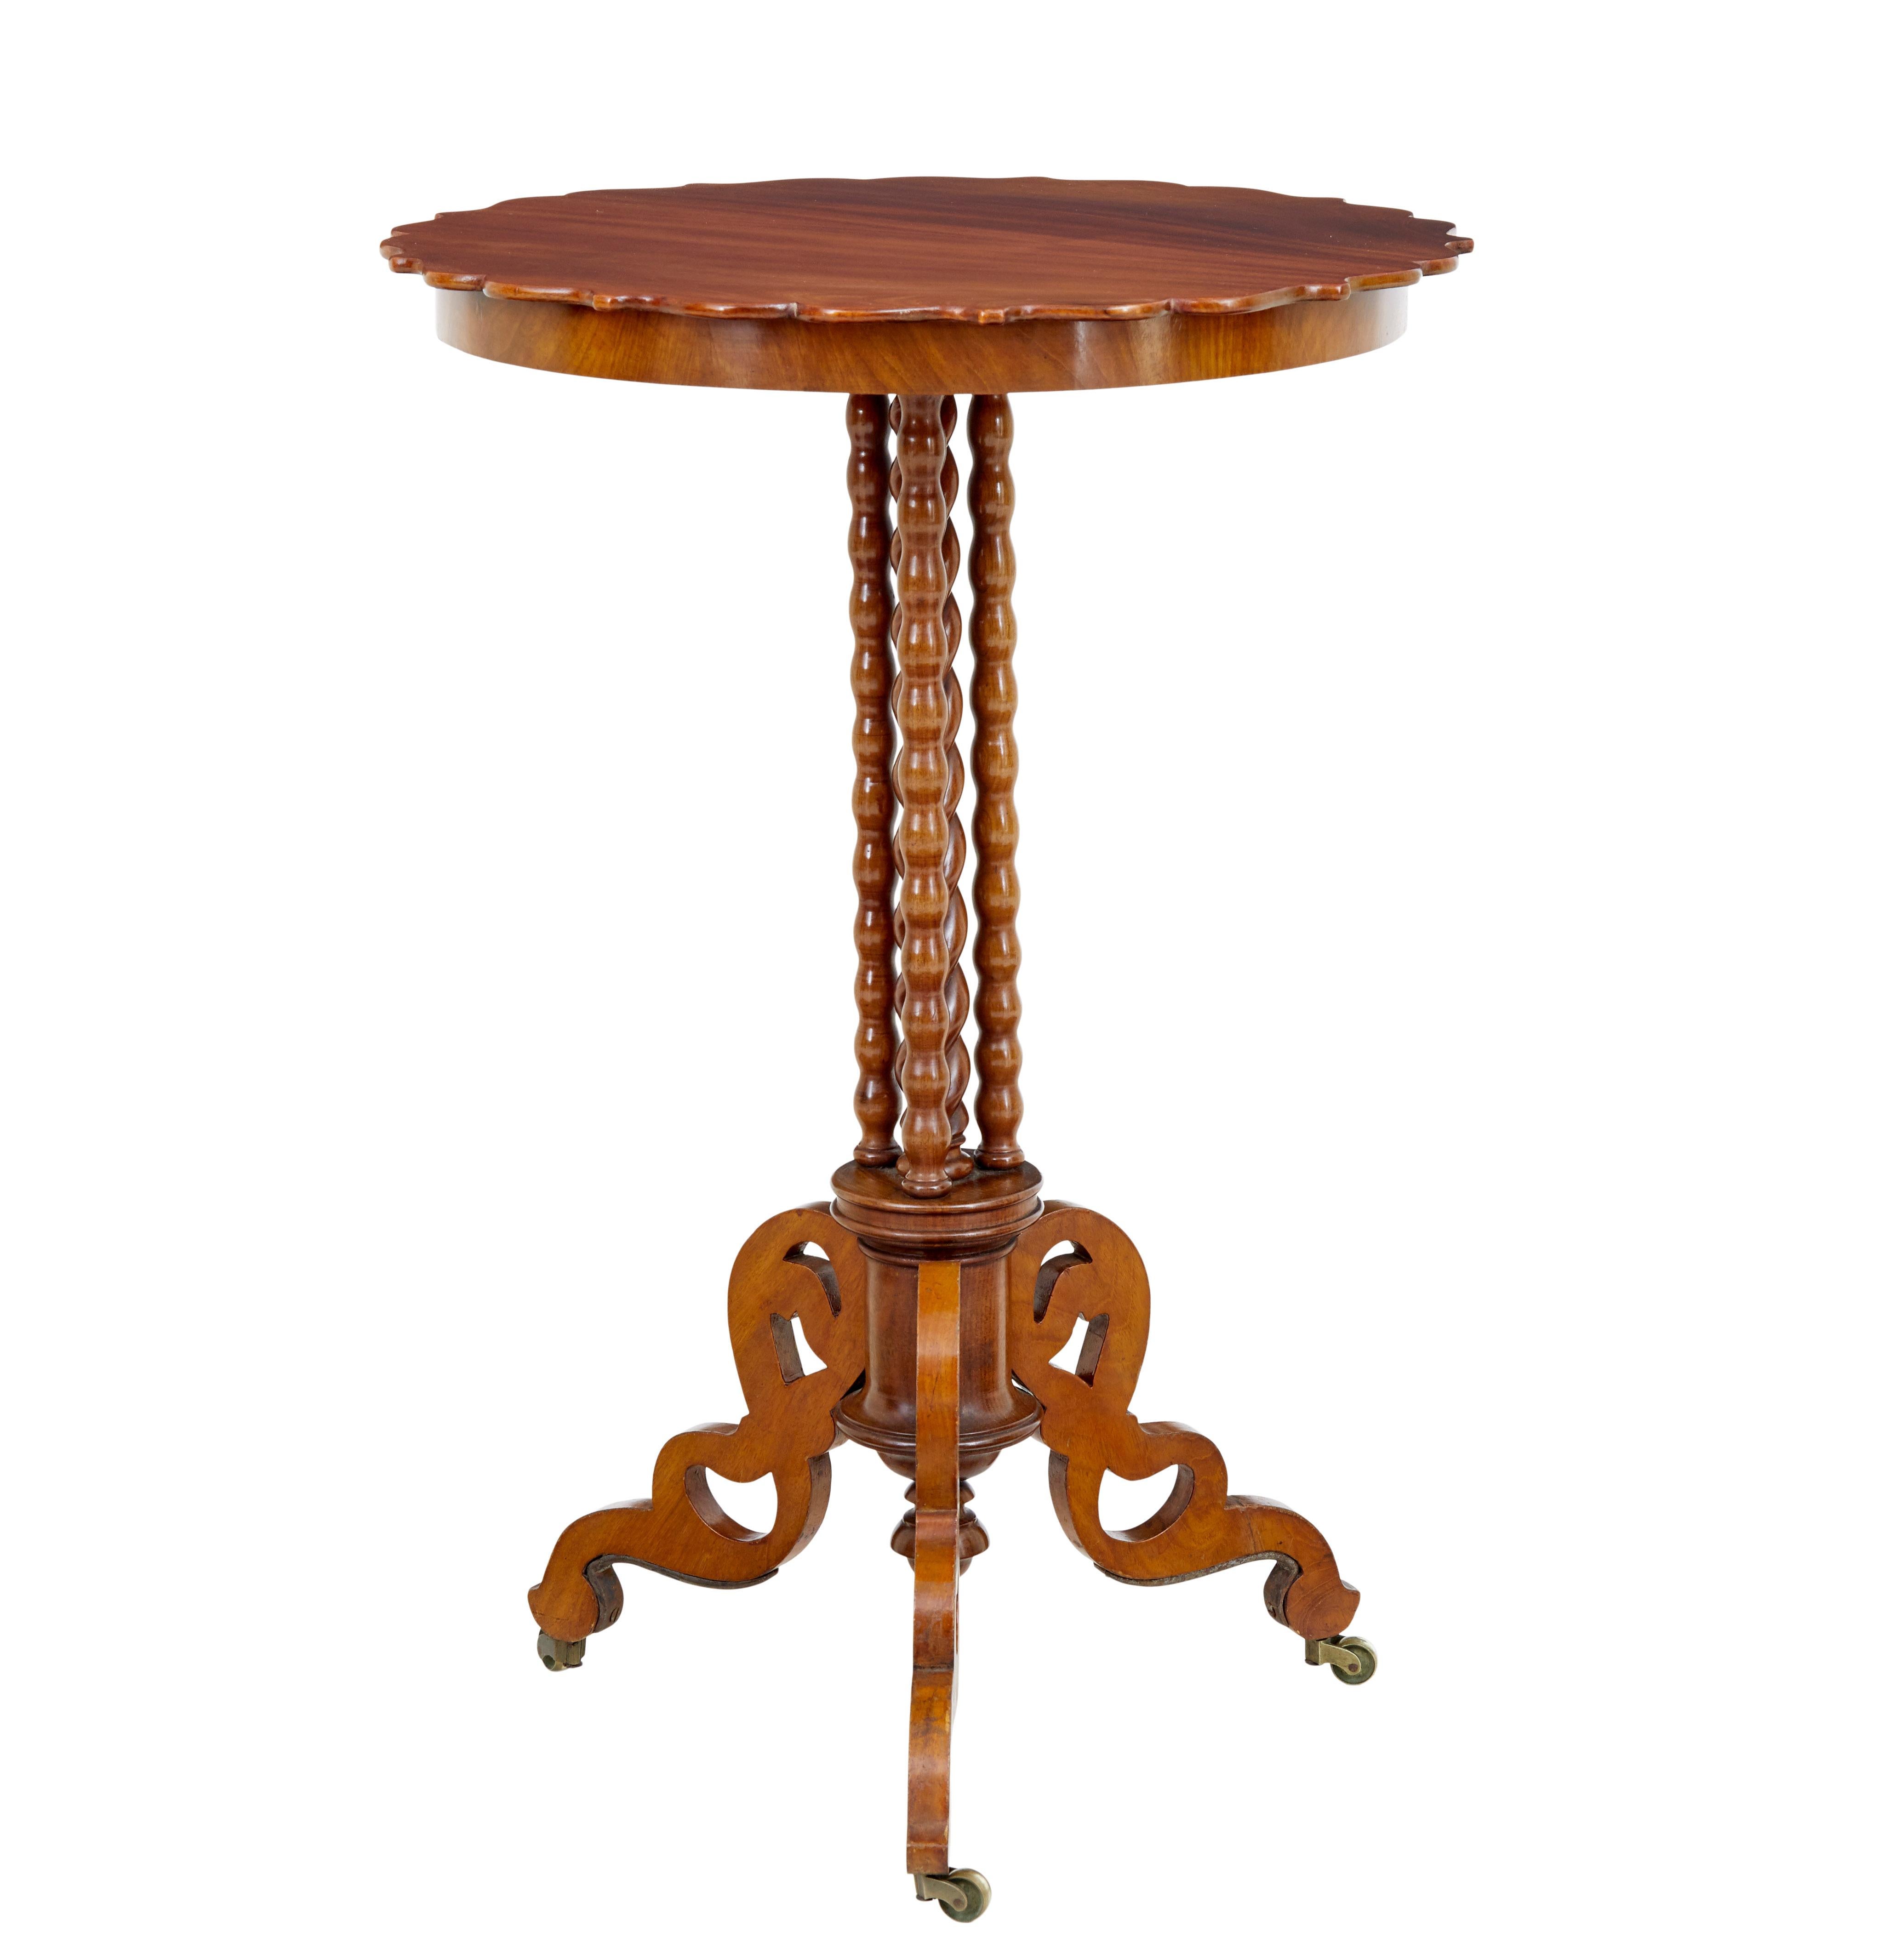 Late 19th century mahogany bobbin turned occasional table, circa 1890.

Scalloped shaped circular top, which sits on a stem of 1 barley twist stem surrounded by a further 3 barley twist supports, all supported on 3 fret cut scrolling legs and